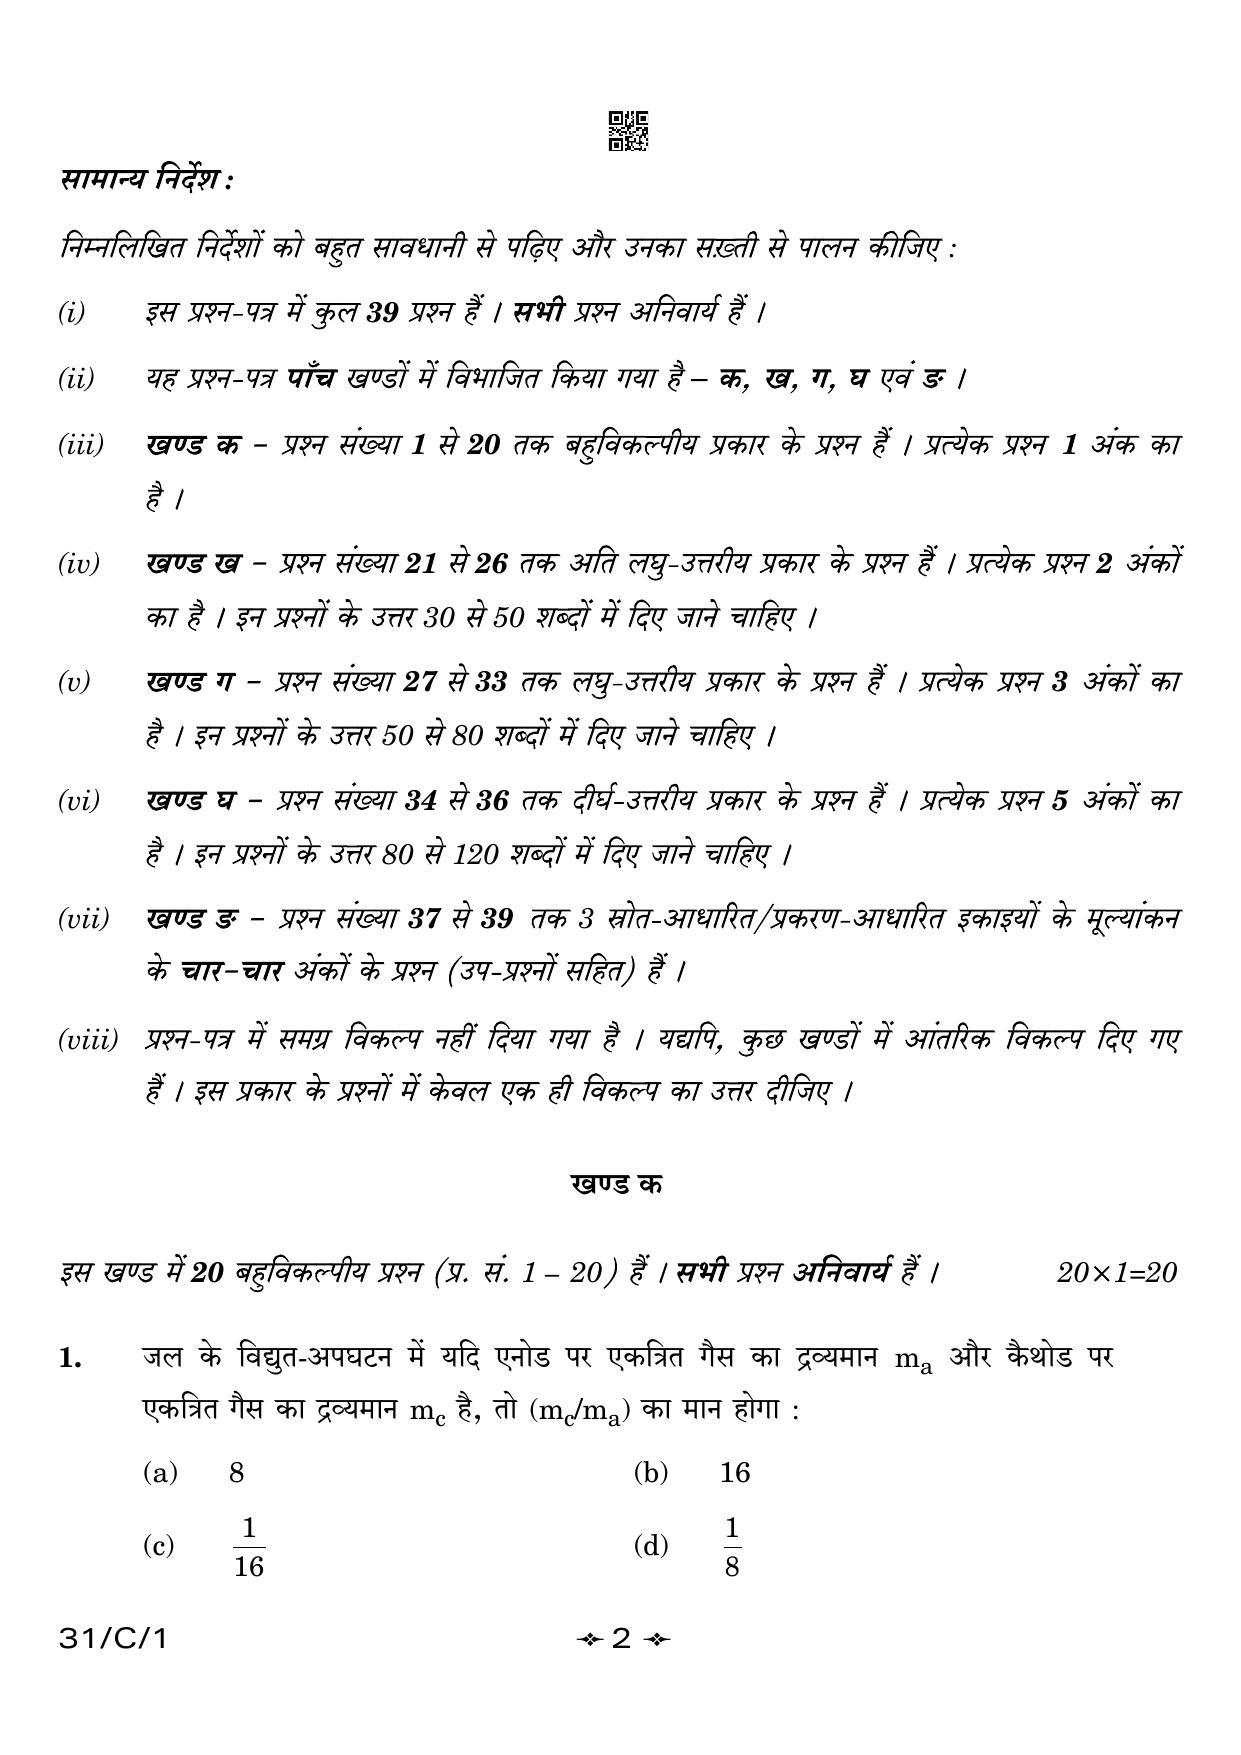 CBSE Class 10 31-1 Science 2023 (Compartment) Question Paper - Page 2